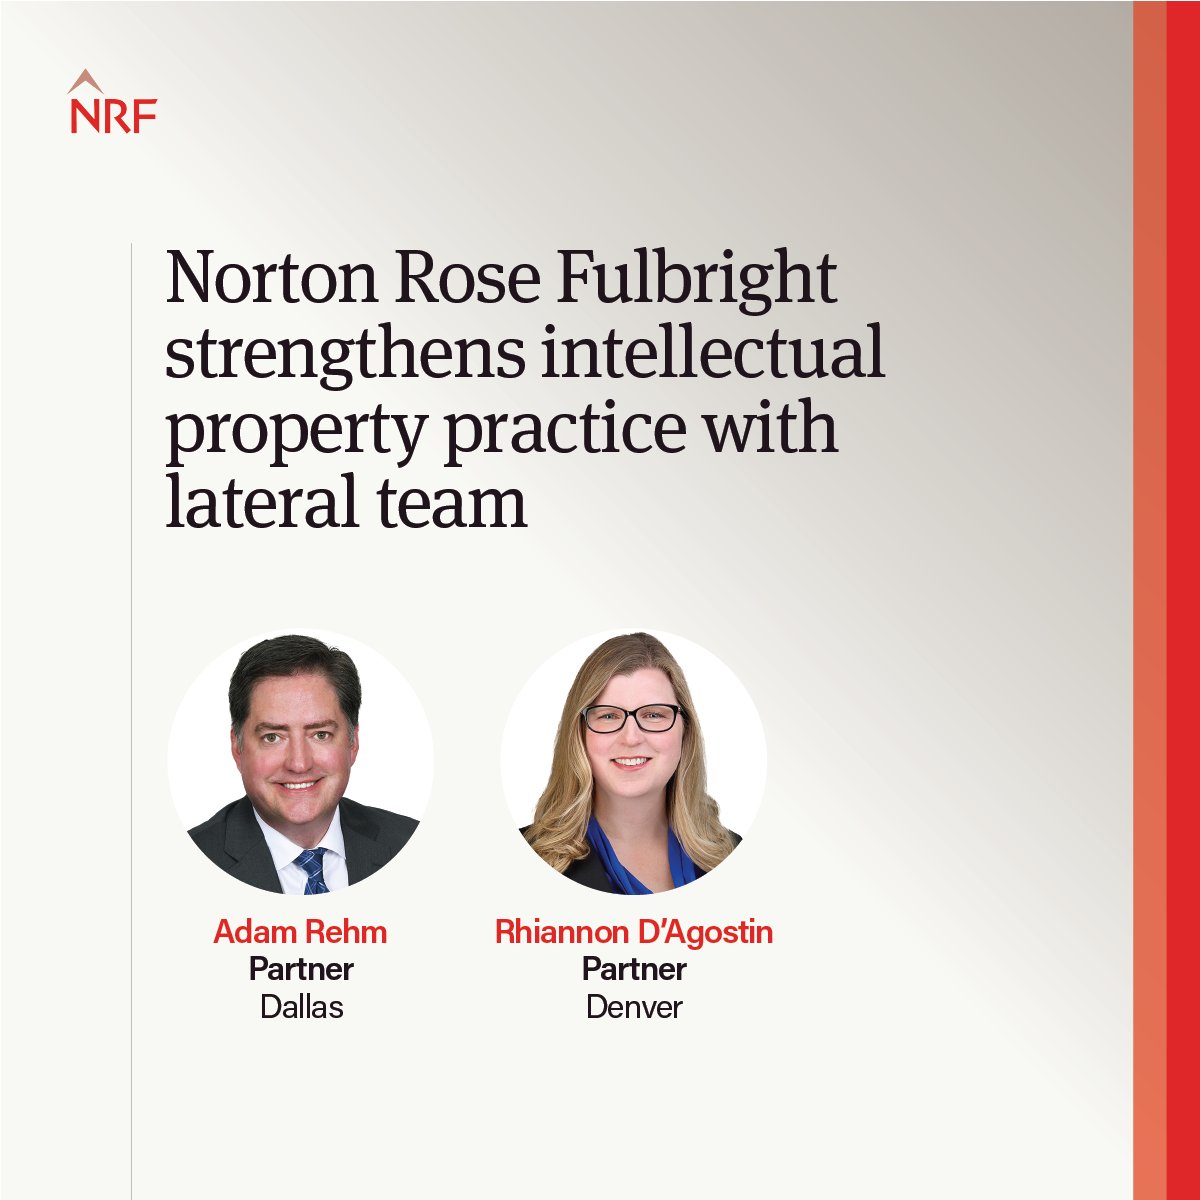 We’re excited to announce that partners Adam Rehm and Rhiannon D’Agostin as well as counsel Zack Cleary have joined our firm’s intellectual property practice. ow.ly/rLg750RFYsb